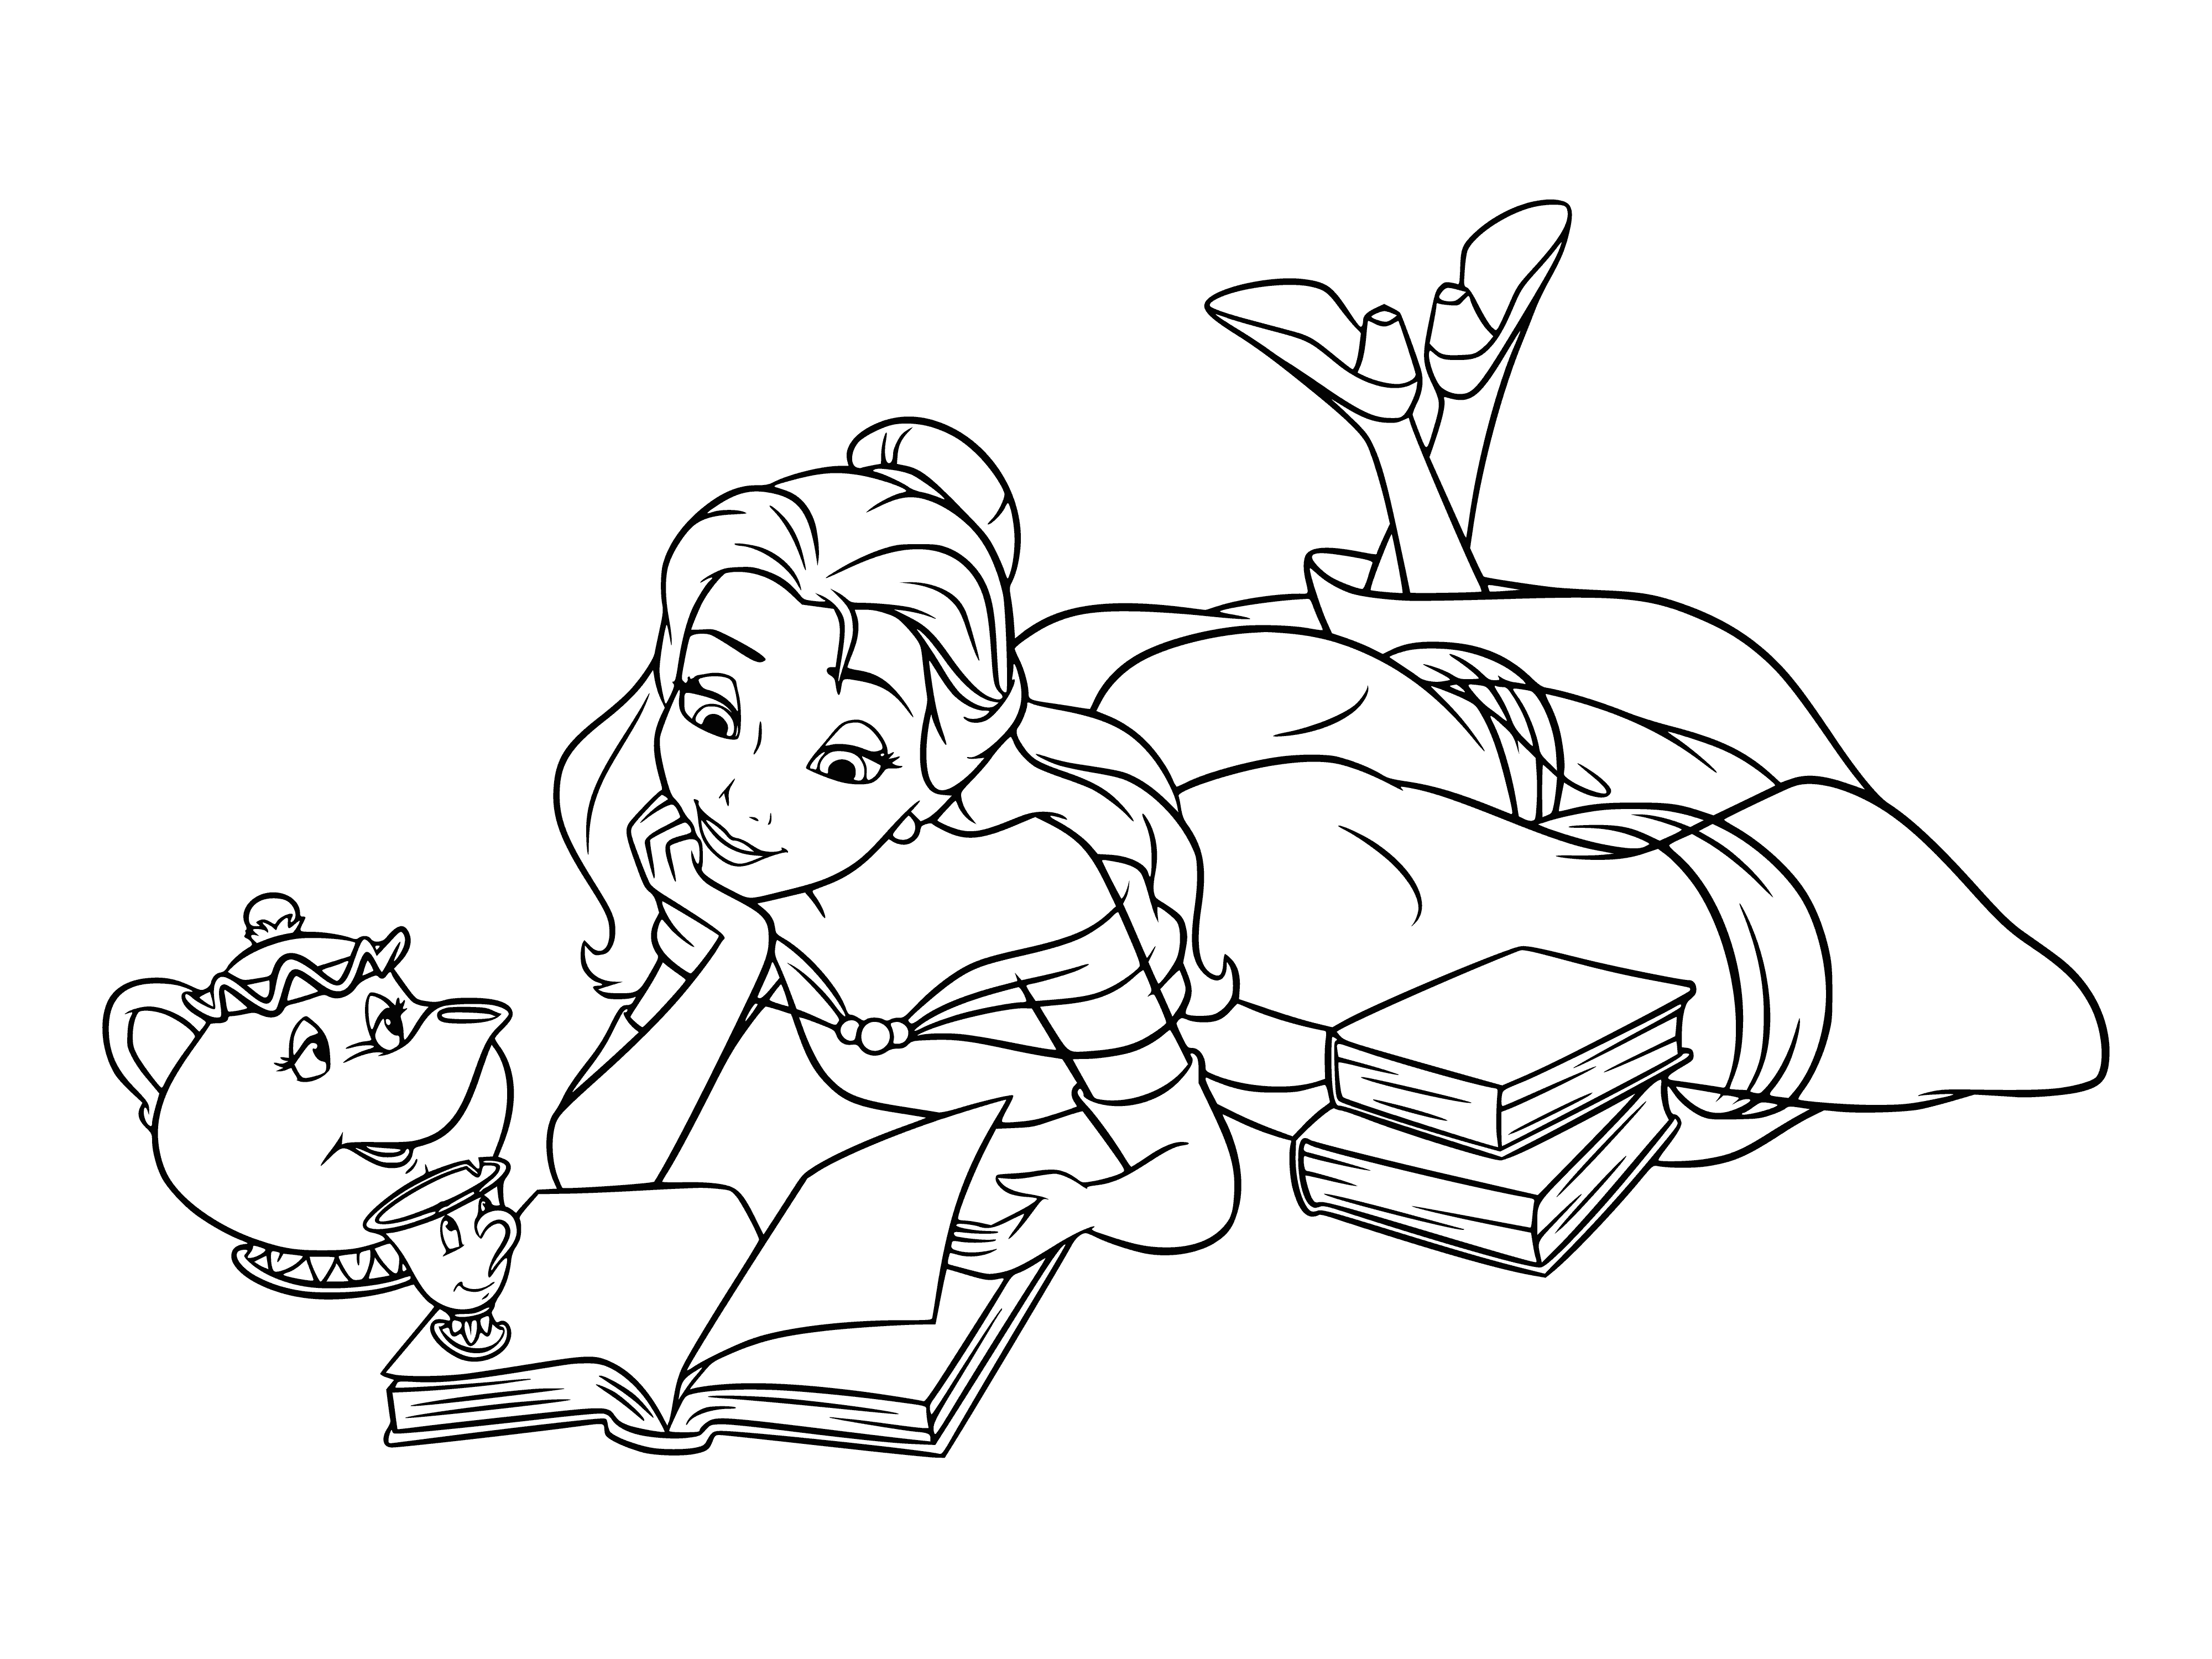 coloring page: Belle contentedly reads a book with a beautiful rose-covered cover while in a comfy chair.